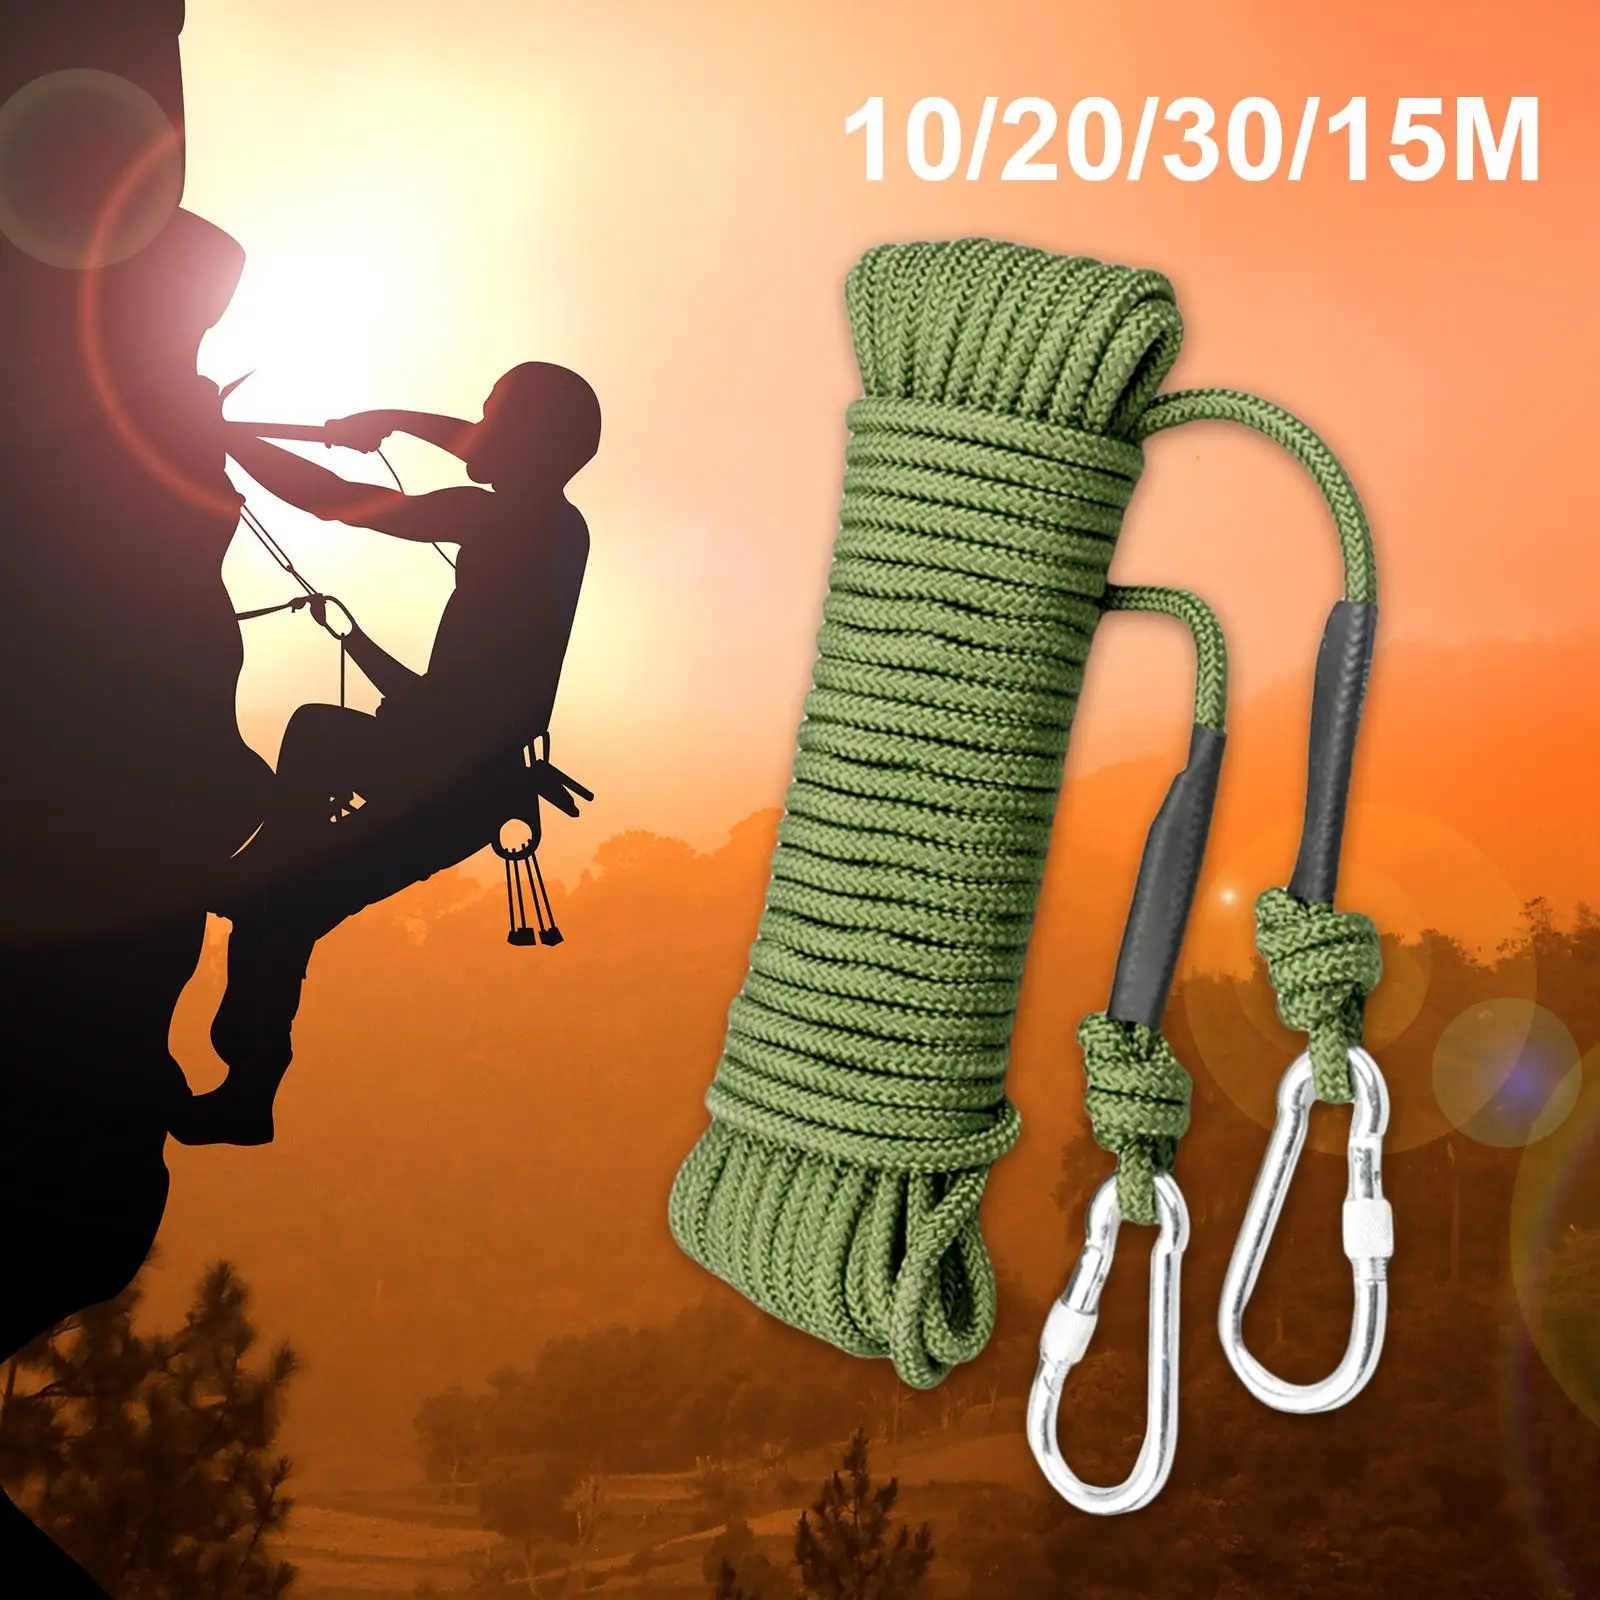 Outdoor Rock Climbing Rope Fire Escape Equipment with Steel Wire Hooks Green Lanyard Core Gear for Emergency Ice Climbing Hiking